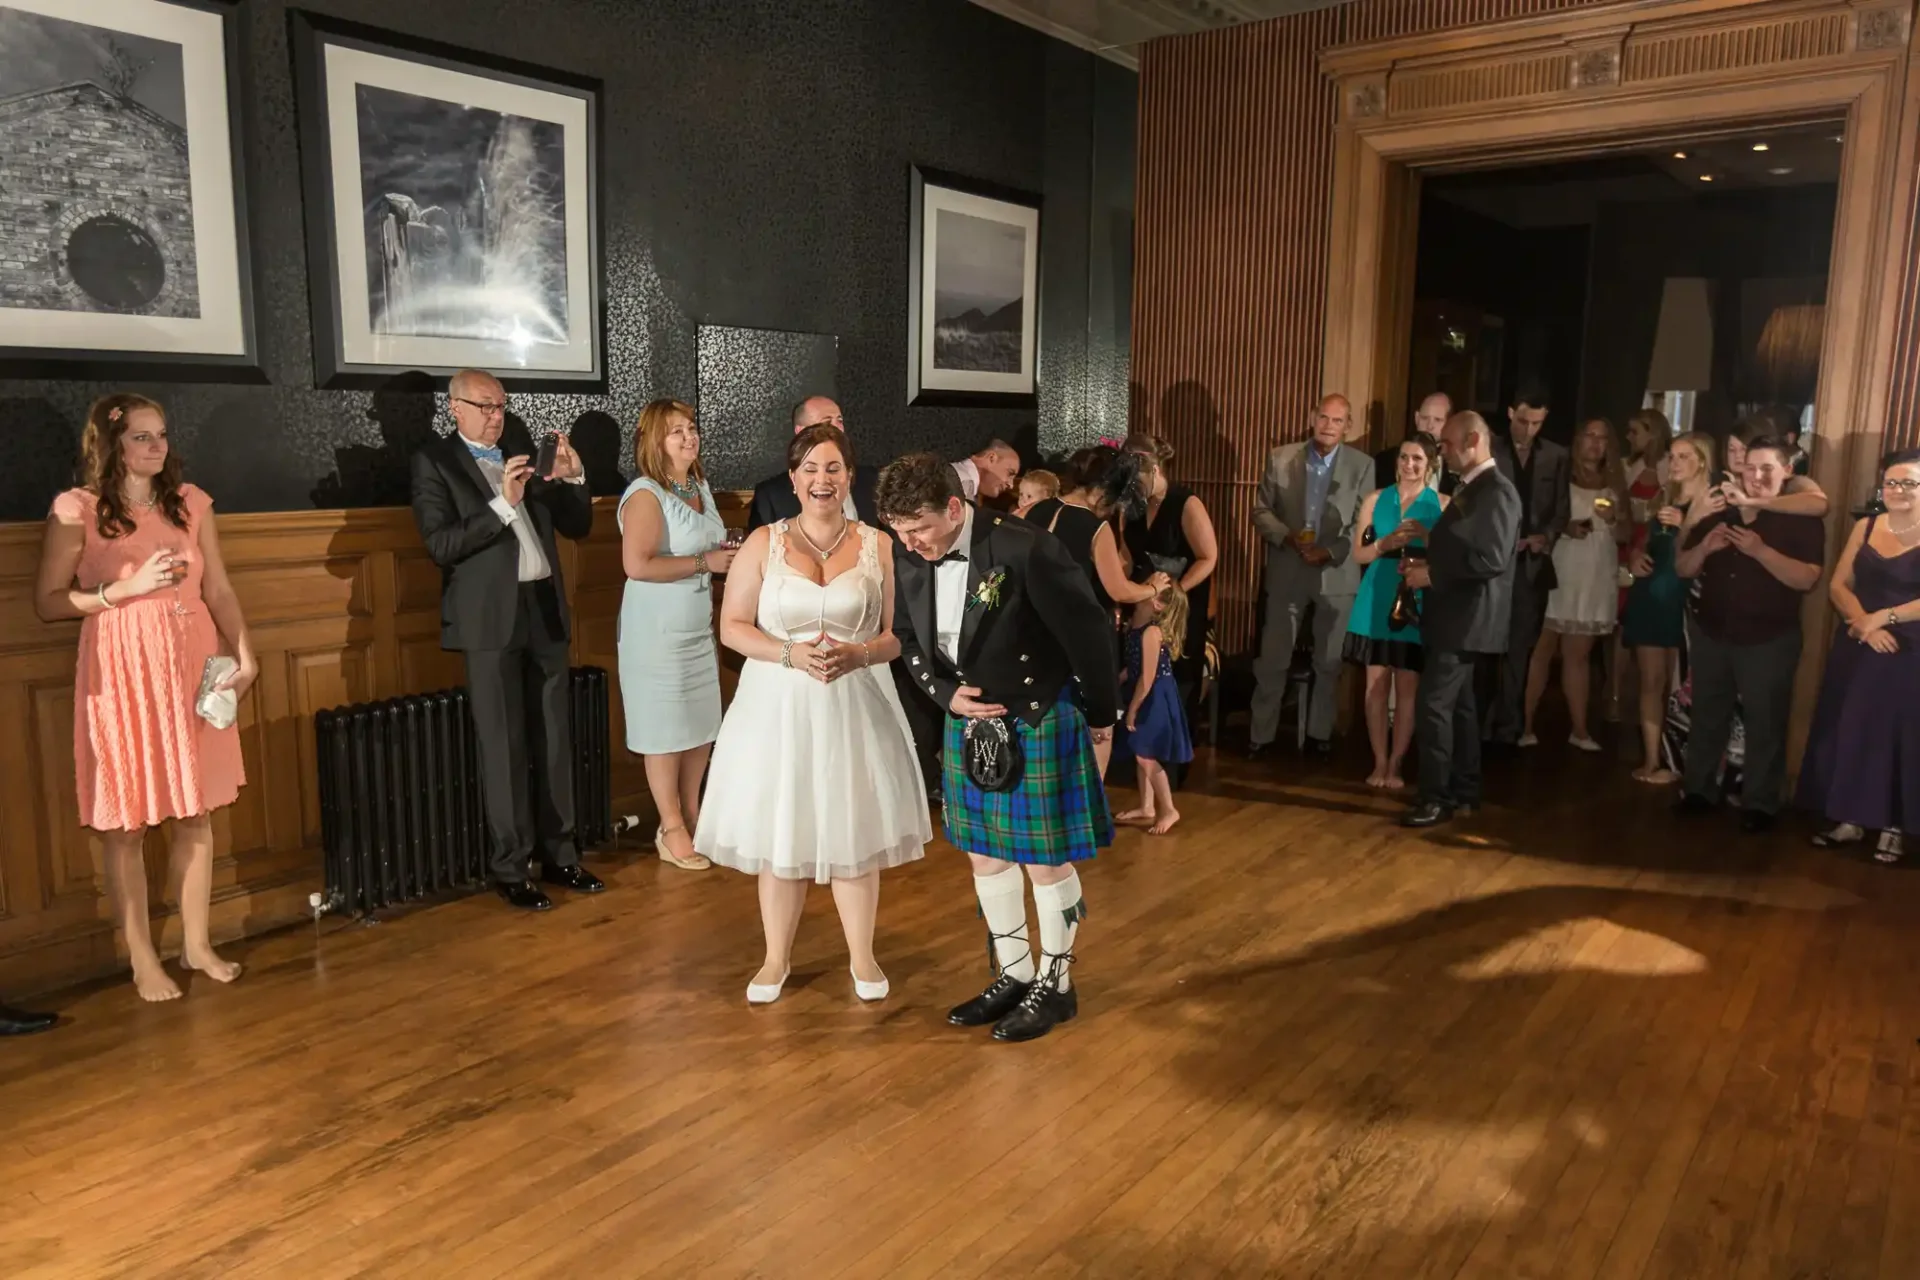 A bride and groom laugh together as they walk down the aisle, surrounded by guests in a warmly lit room with elegant decor. the groom wears a traditional kilt.